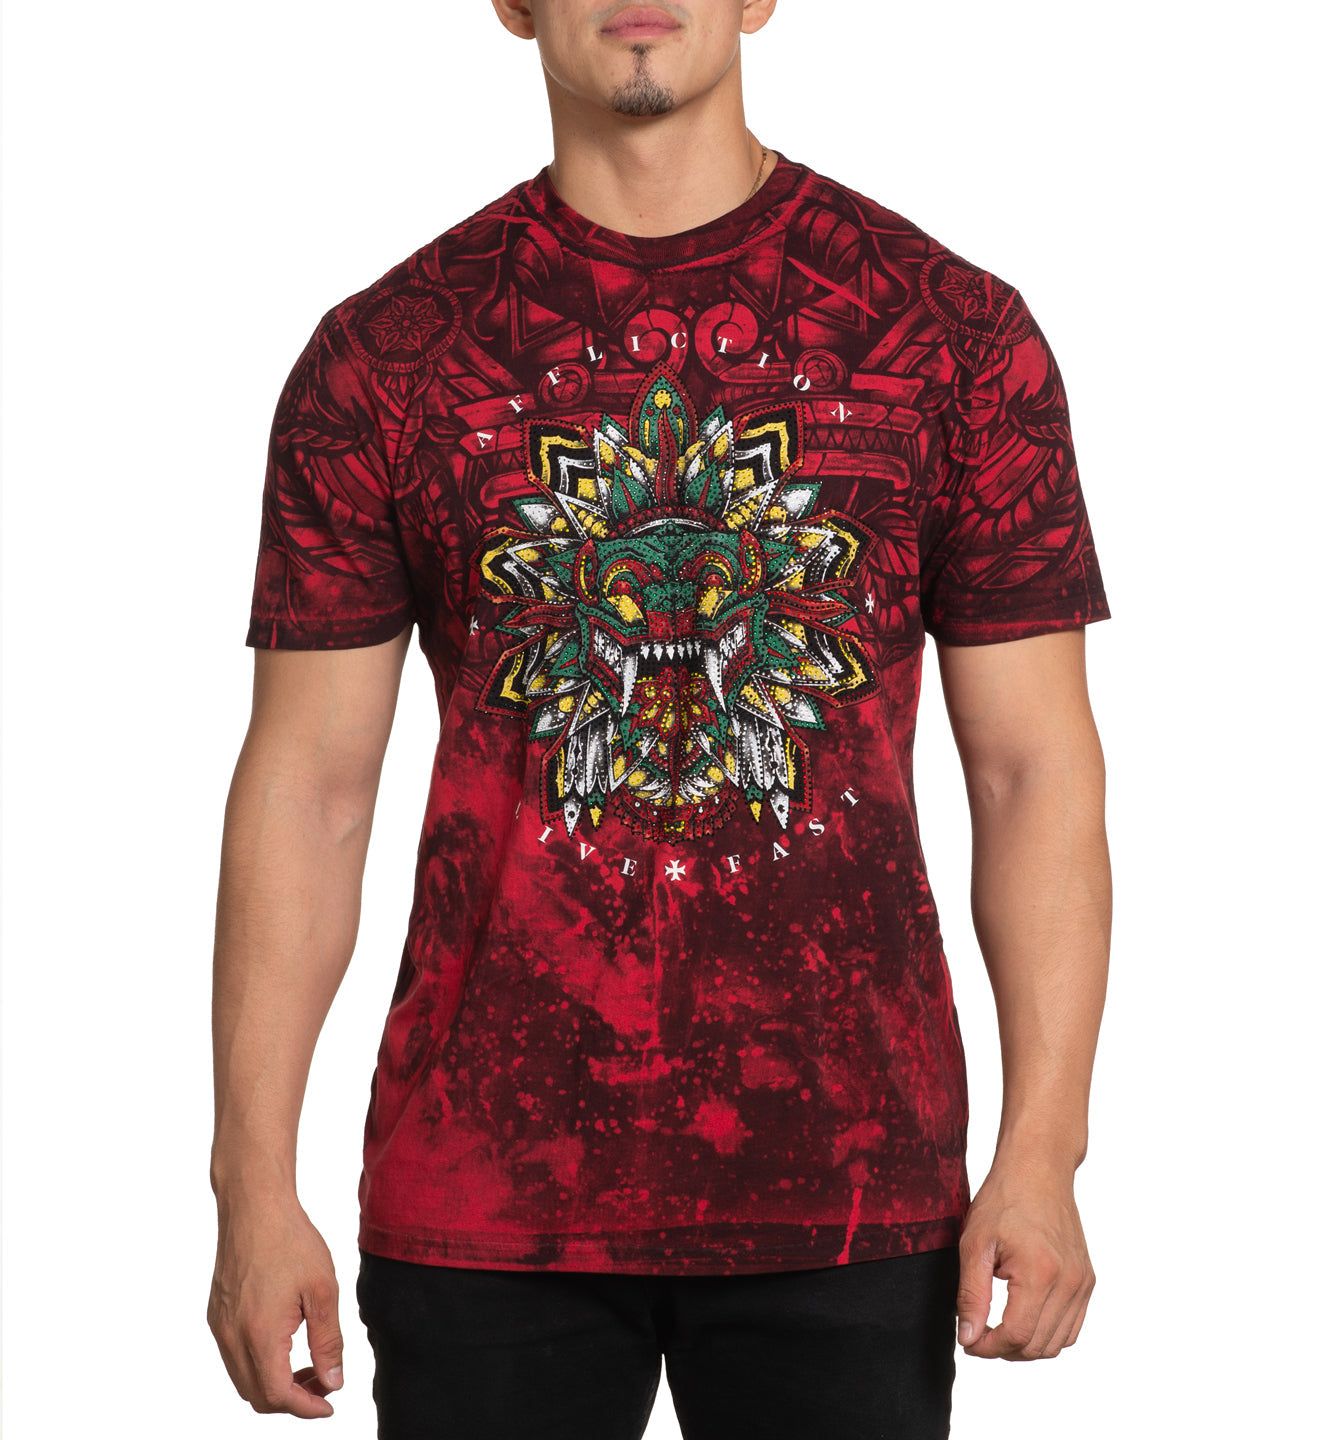 Golden Temple - Affliction Clothing